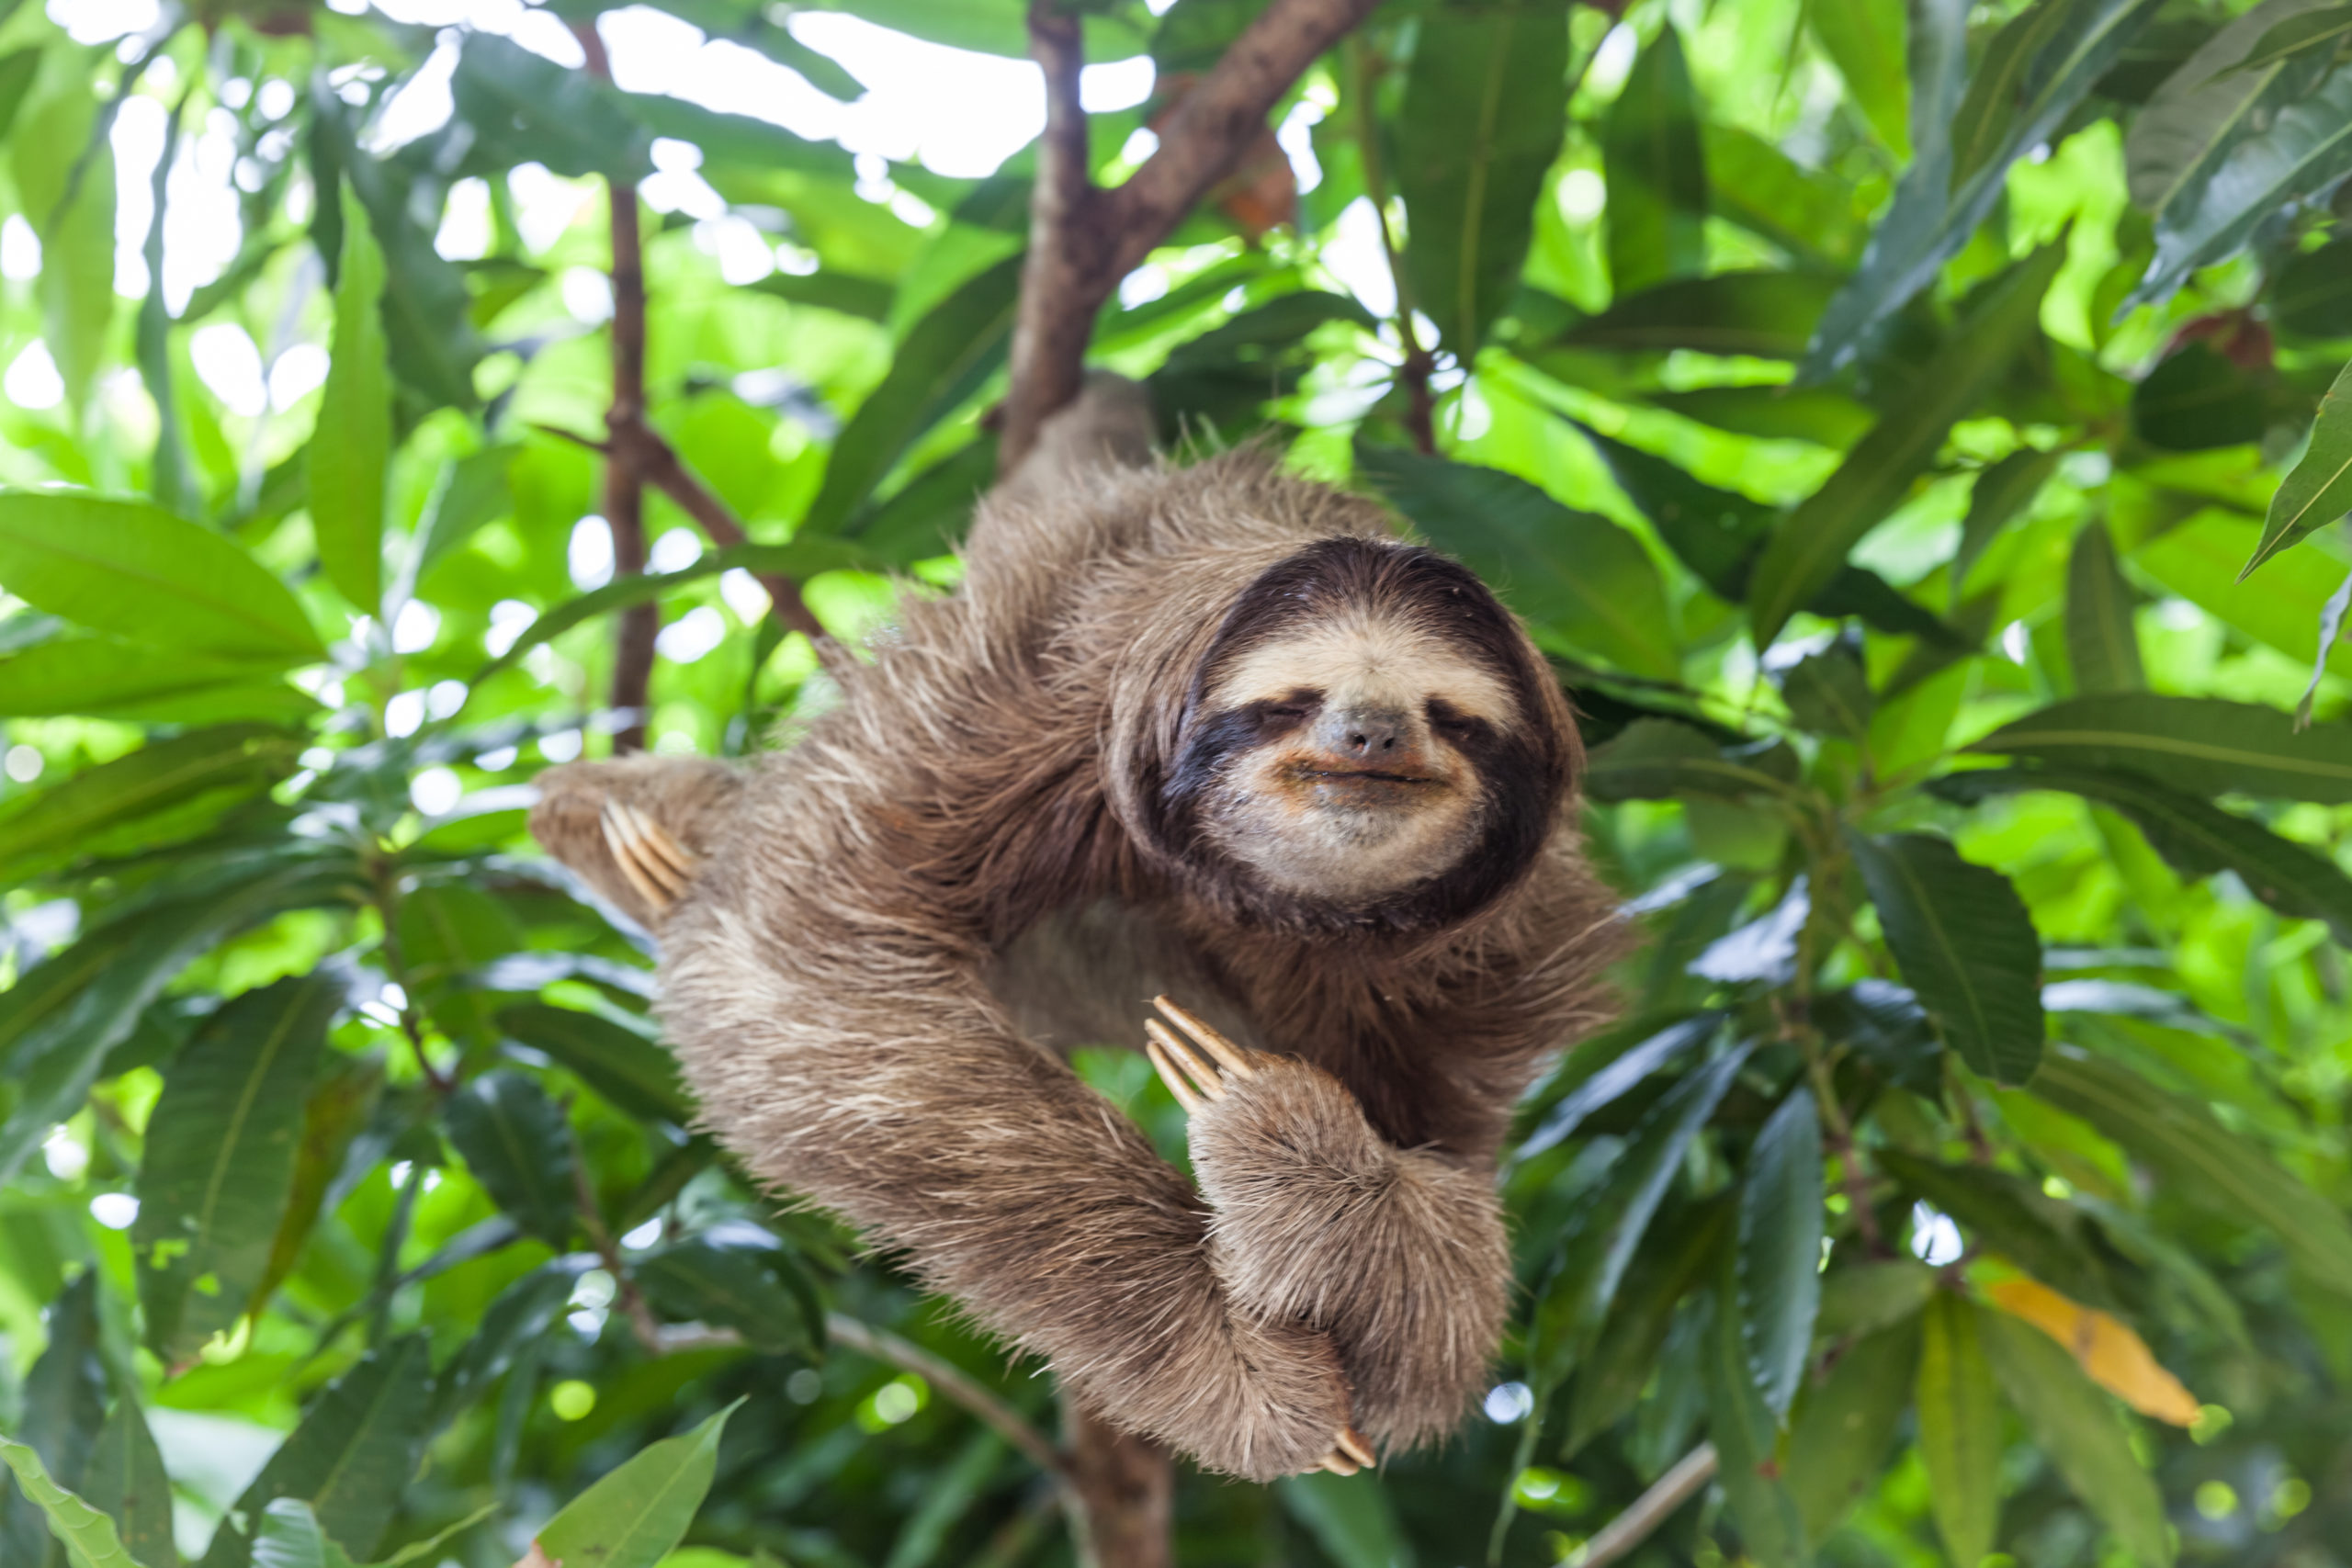 Is it Legal to Own a Pet Sloth in California?